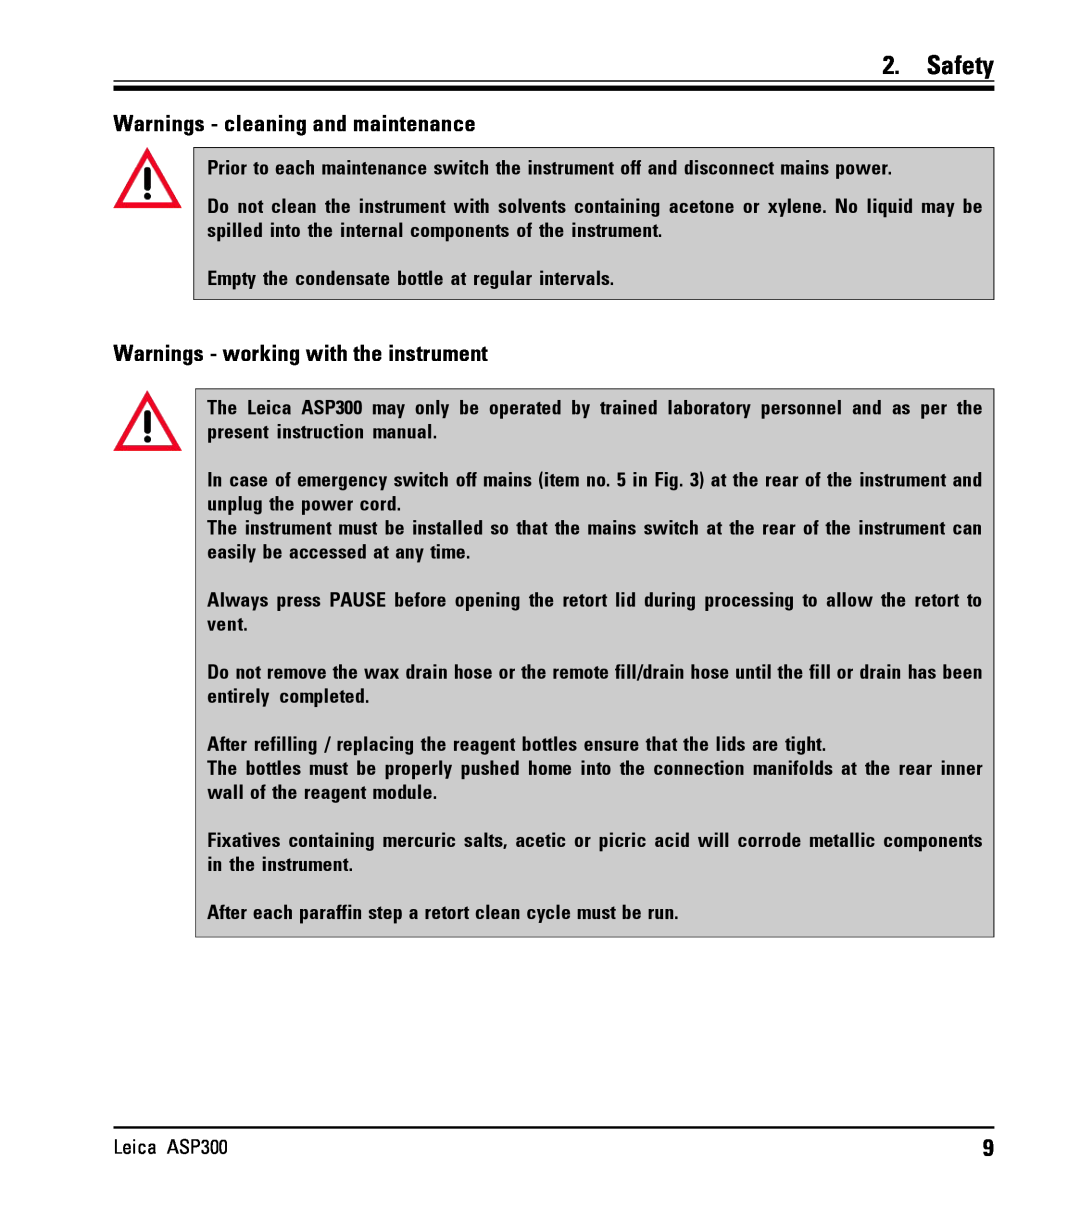 Leica ASP300 instruction manual Safety, Warnings - cleaning and maintenance, Warnings - working with the instrument 